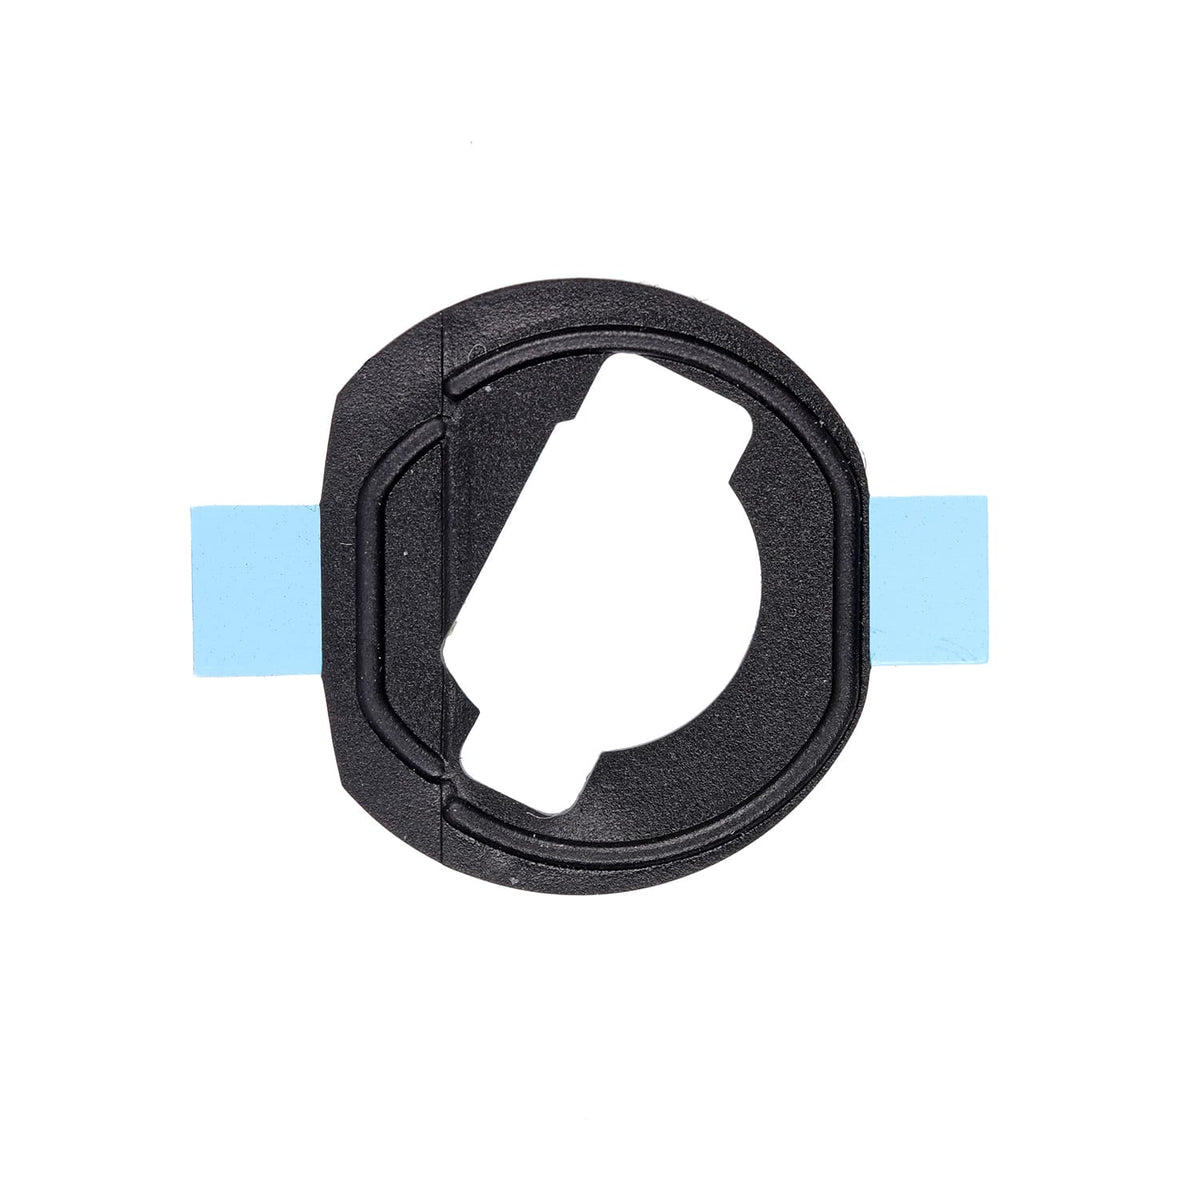 HOME BUTTON RUBBER GASKET FOR IPAD PRO 12.9" 2ND GEN